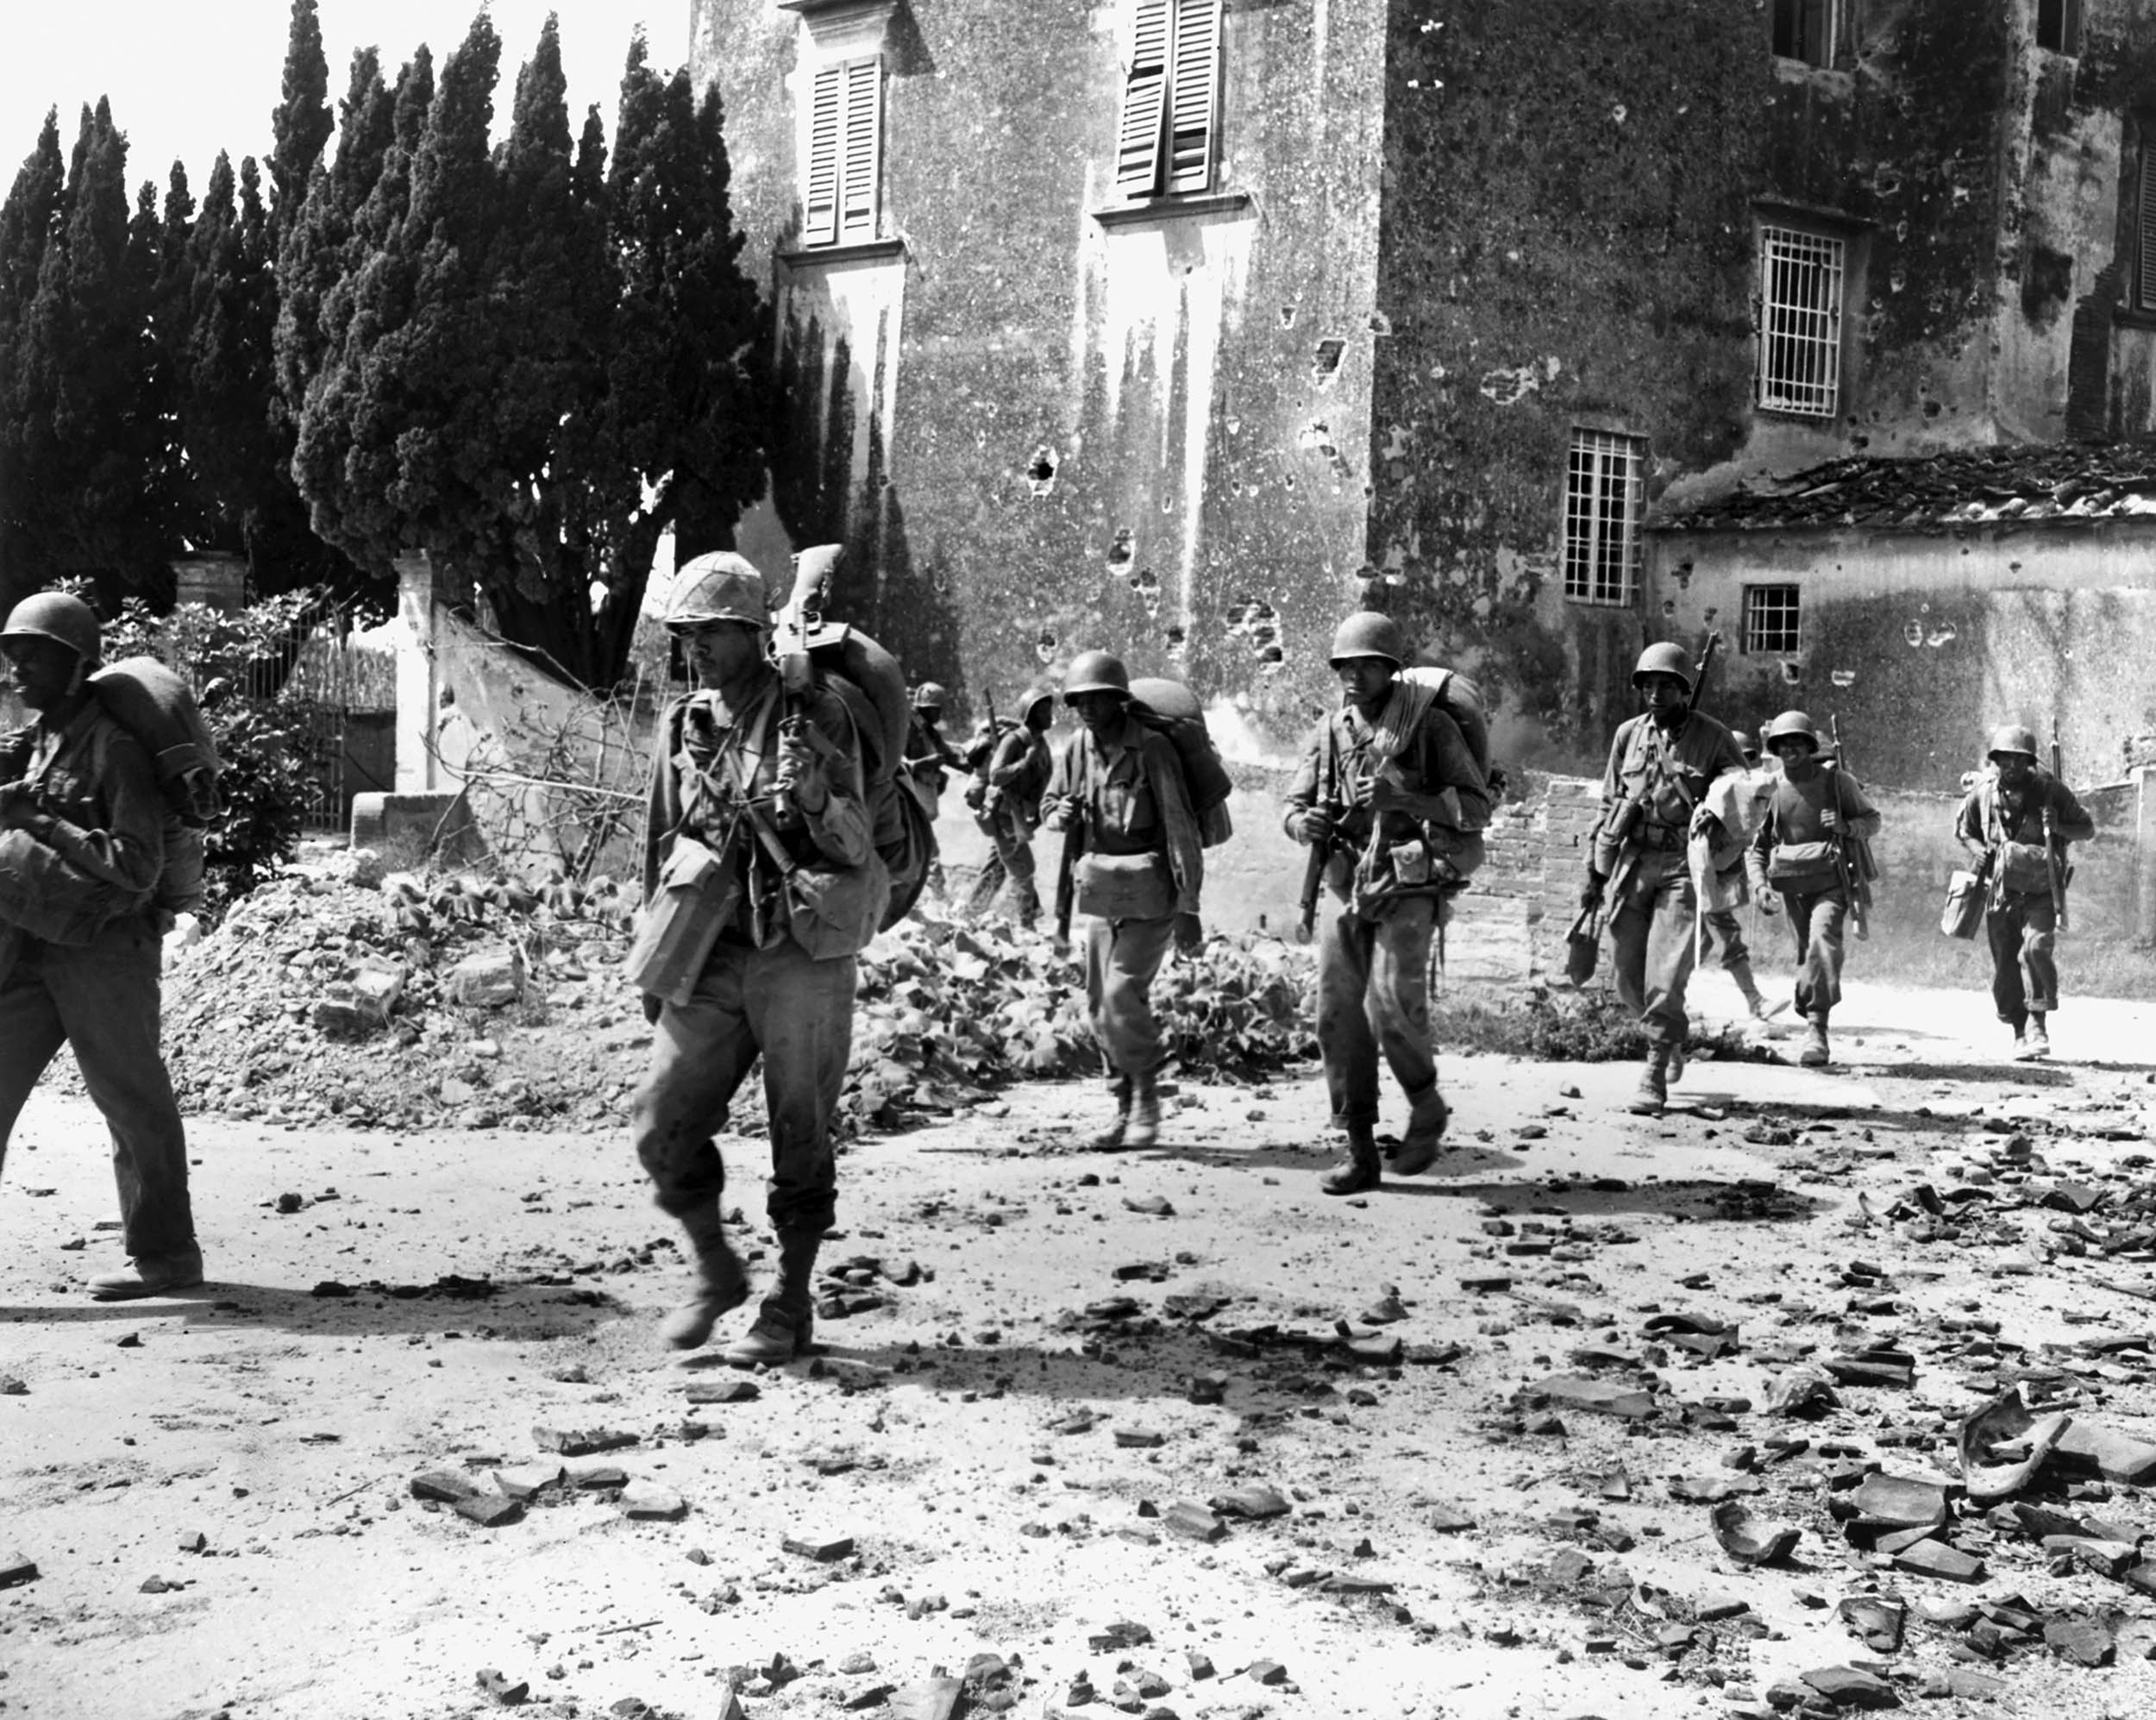 Combat Soldiers on patrol near bombed buildings, somewhere in Europe, 1944 (Everett Collection/Alamy)